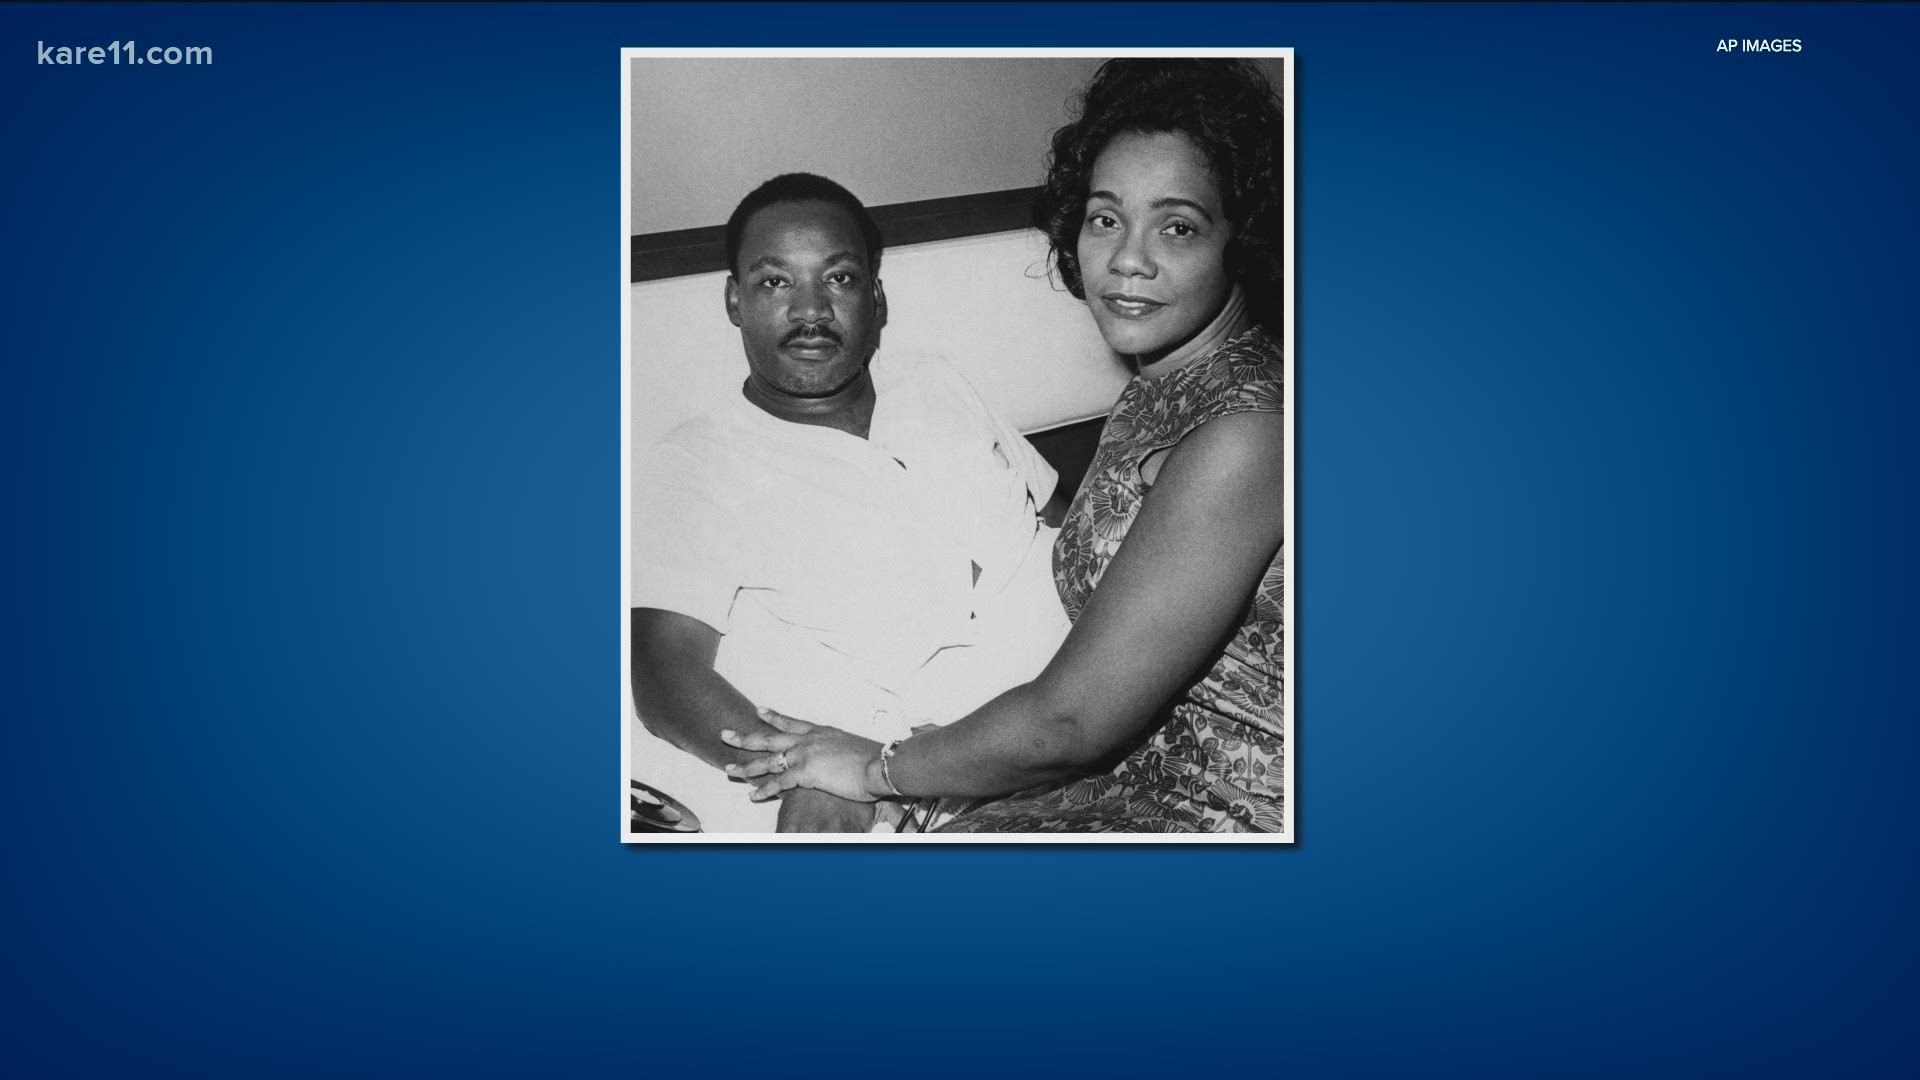 Coretta Scott King, author, activist, civil rights leader and the wife of Martin Luther King Jr., continued her husband's work after his assassination.